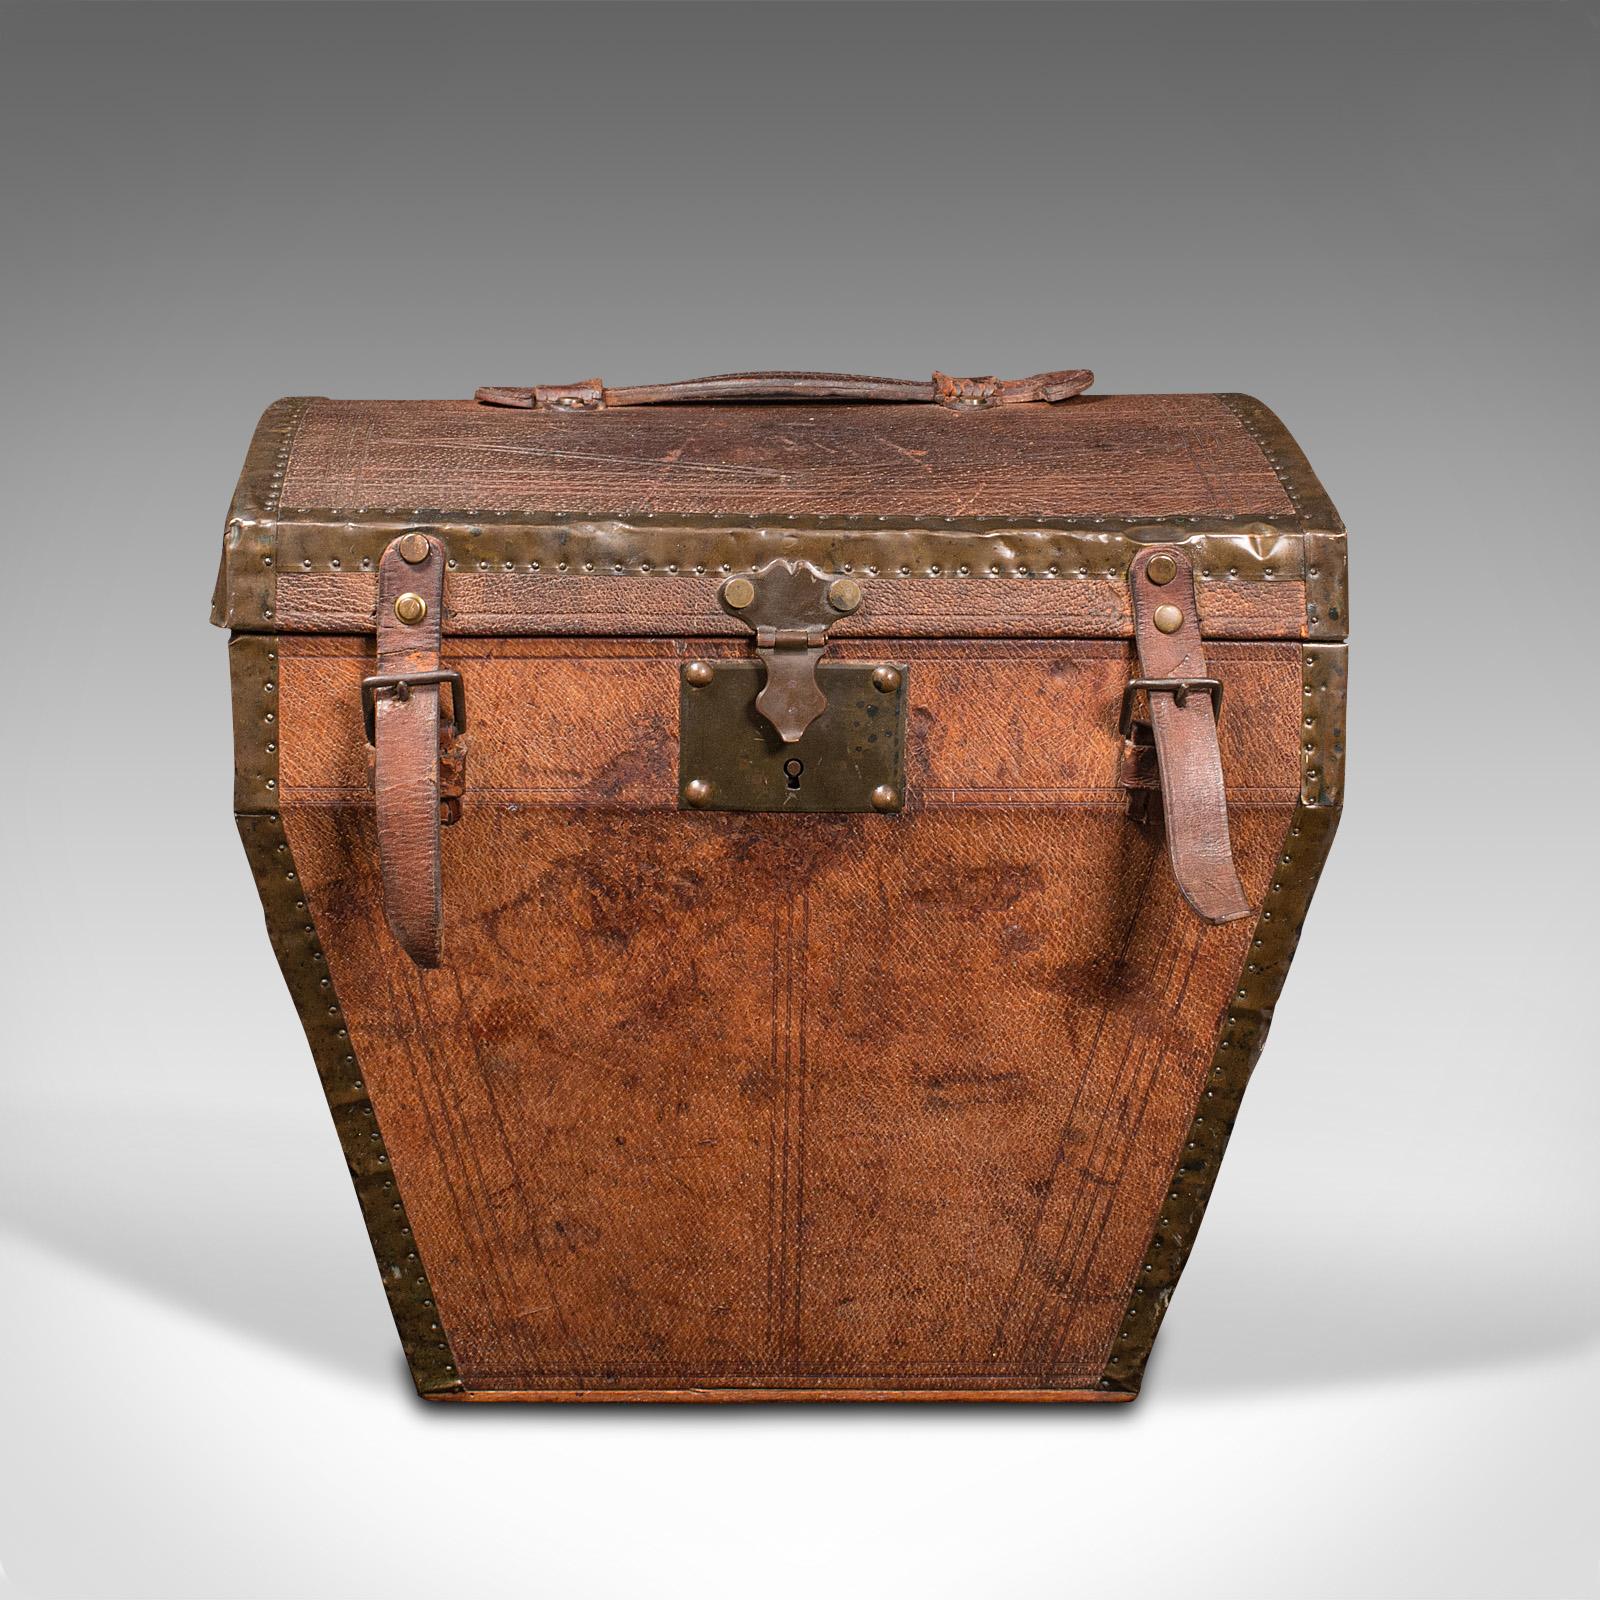 This is an antique touring hat box. A French, leather and brass travel case, dating to the early Victorian period, circa 1850.

Superb bombe hat box with fine French travel appeal
Displays a desirable aged patina and in good original order
Rich